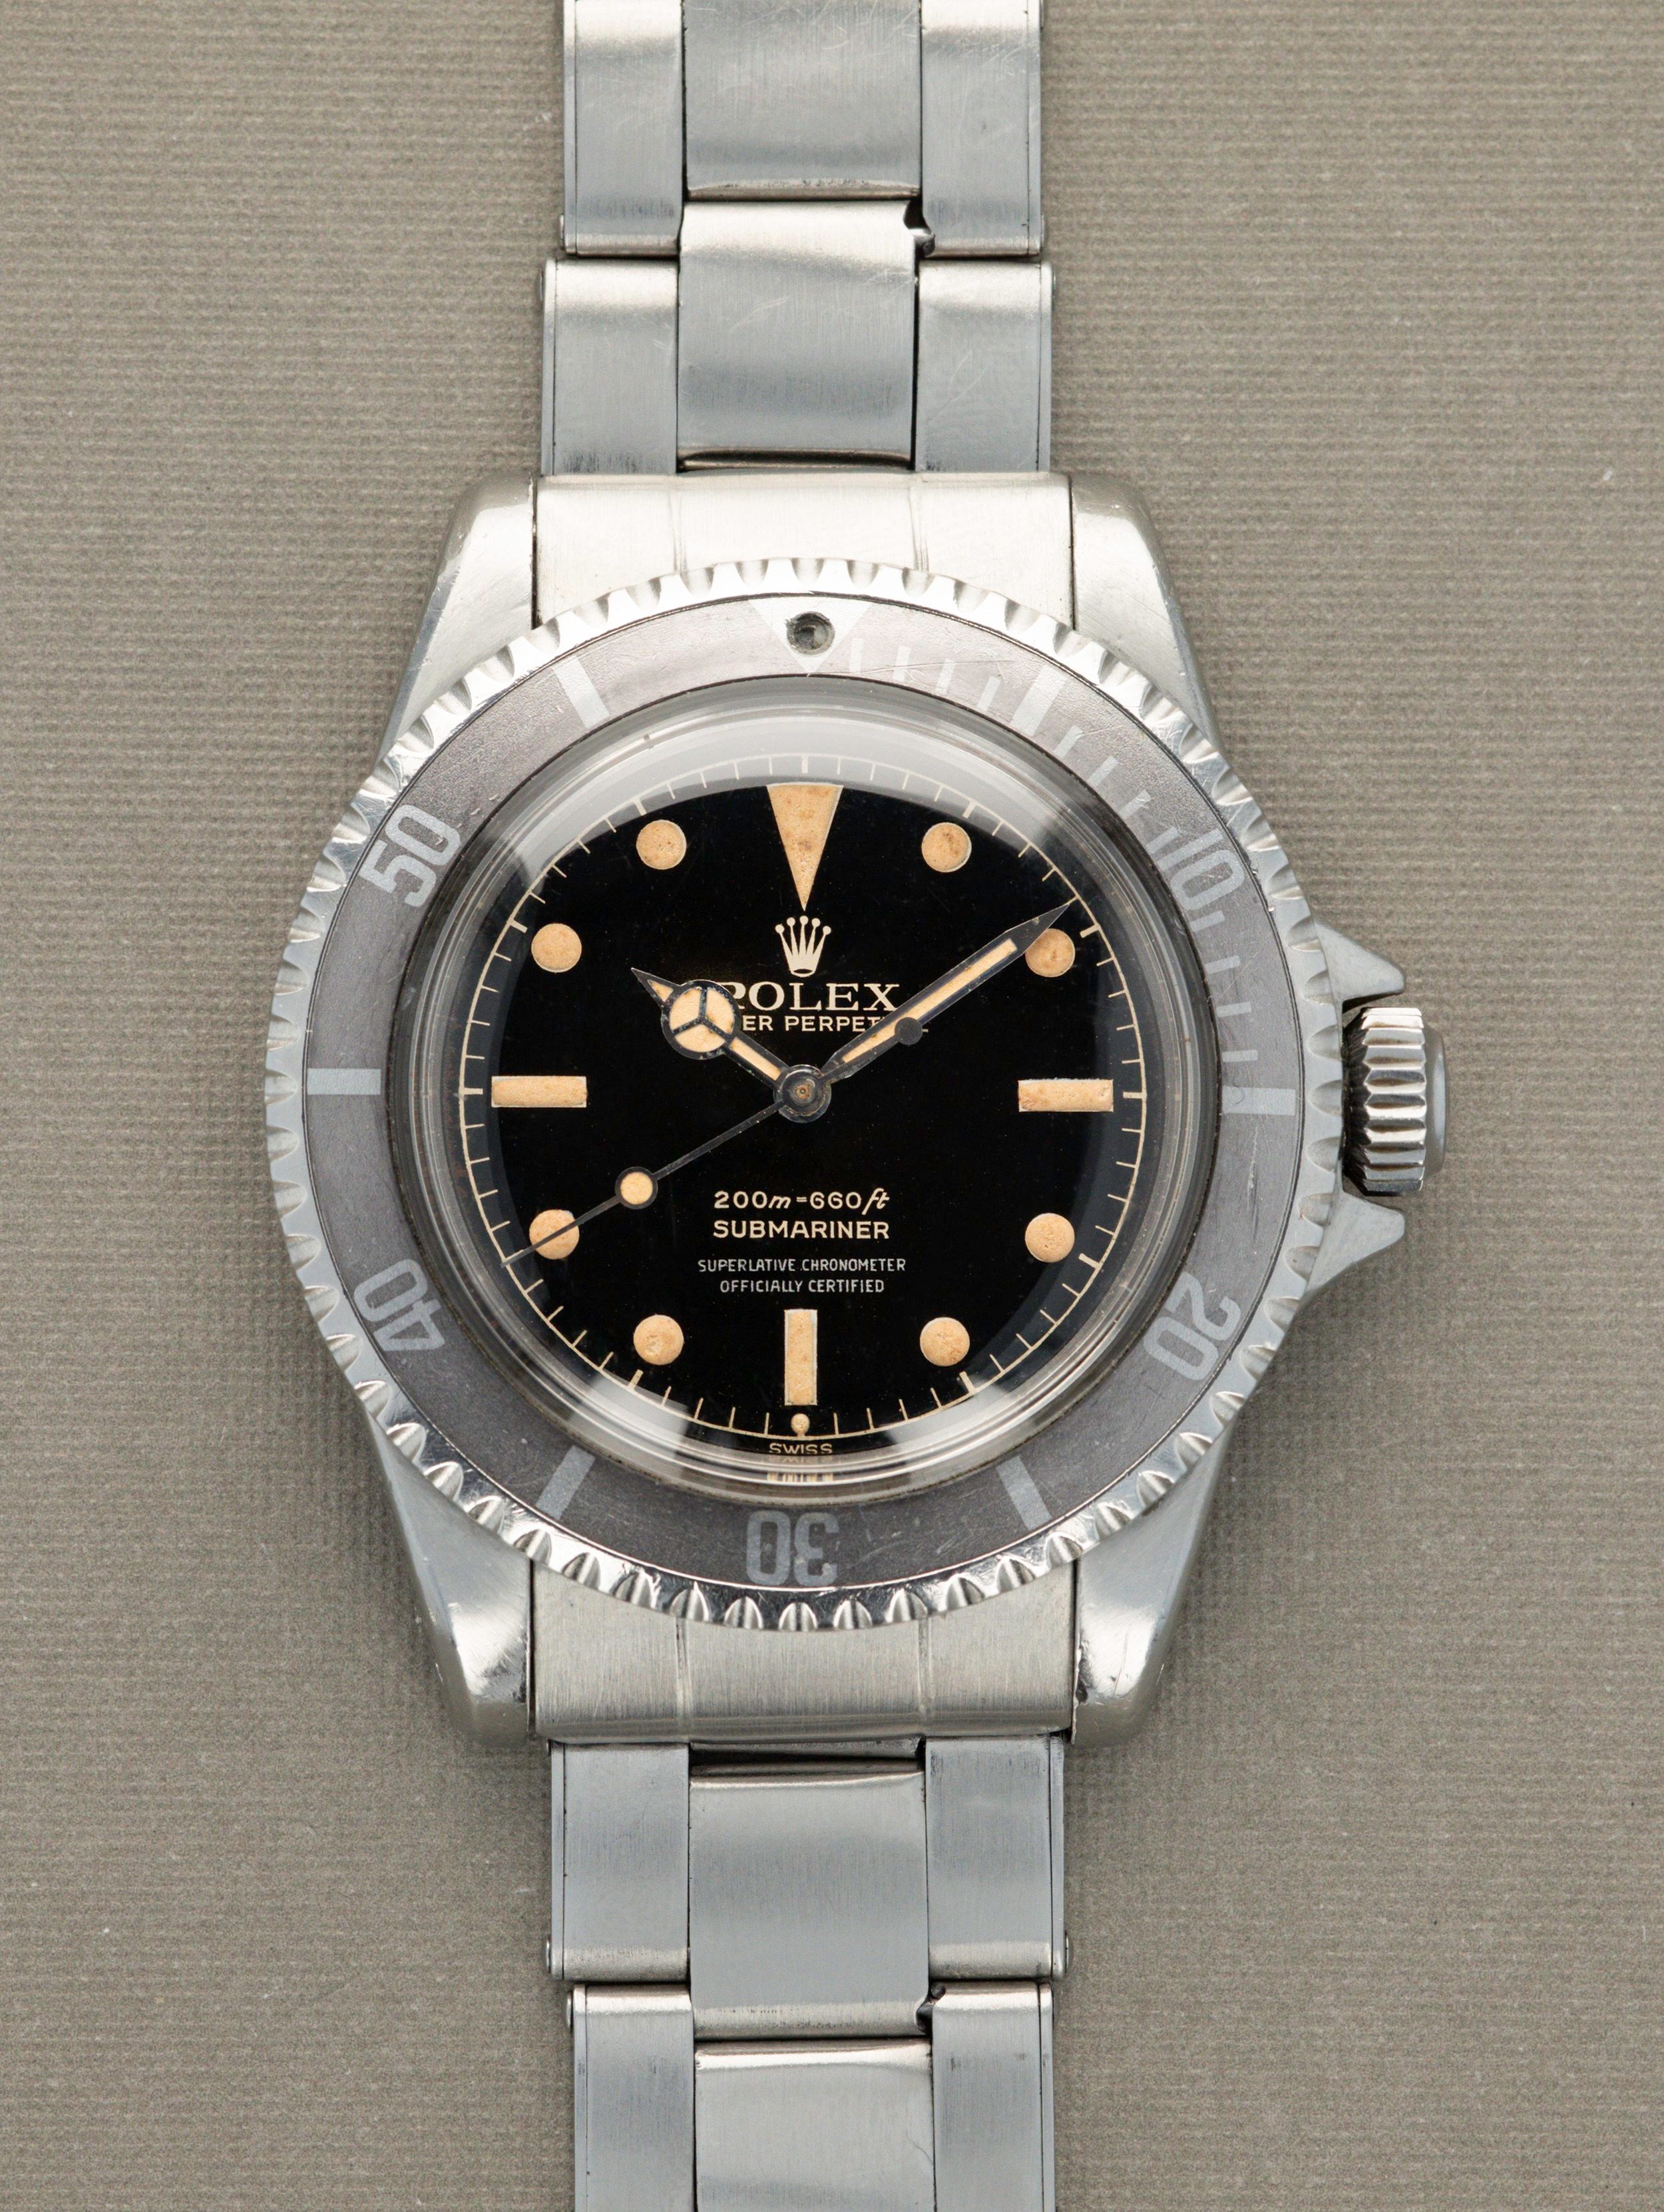 Rolex Submariner Ref. 5512 - Gilt 4-Line Chapter Ring PCG Exclamation Point